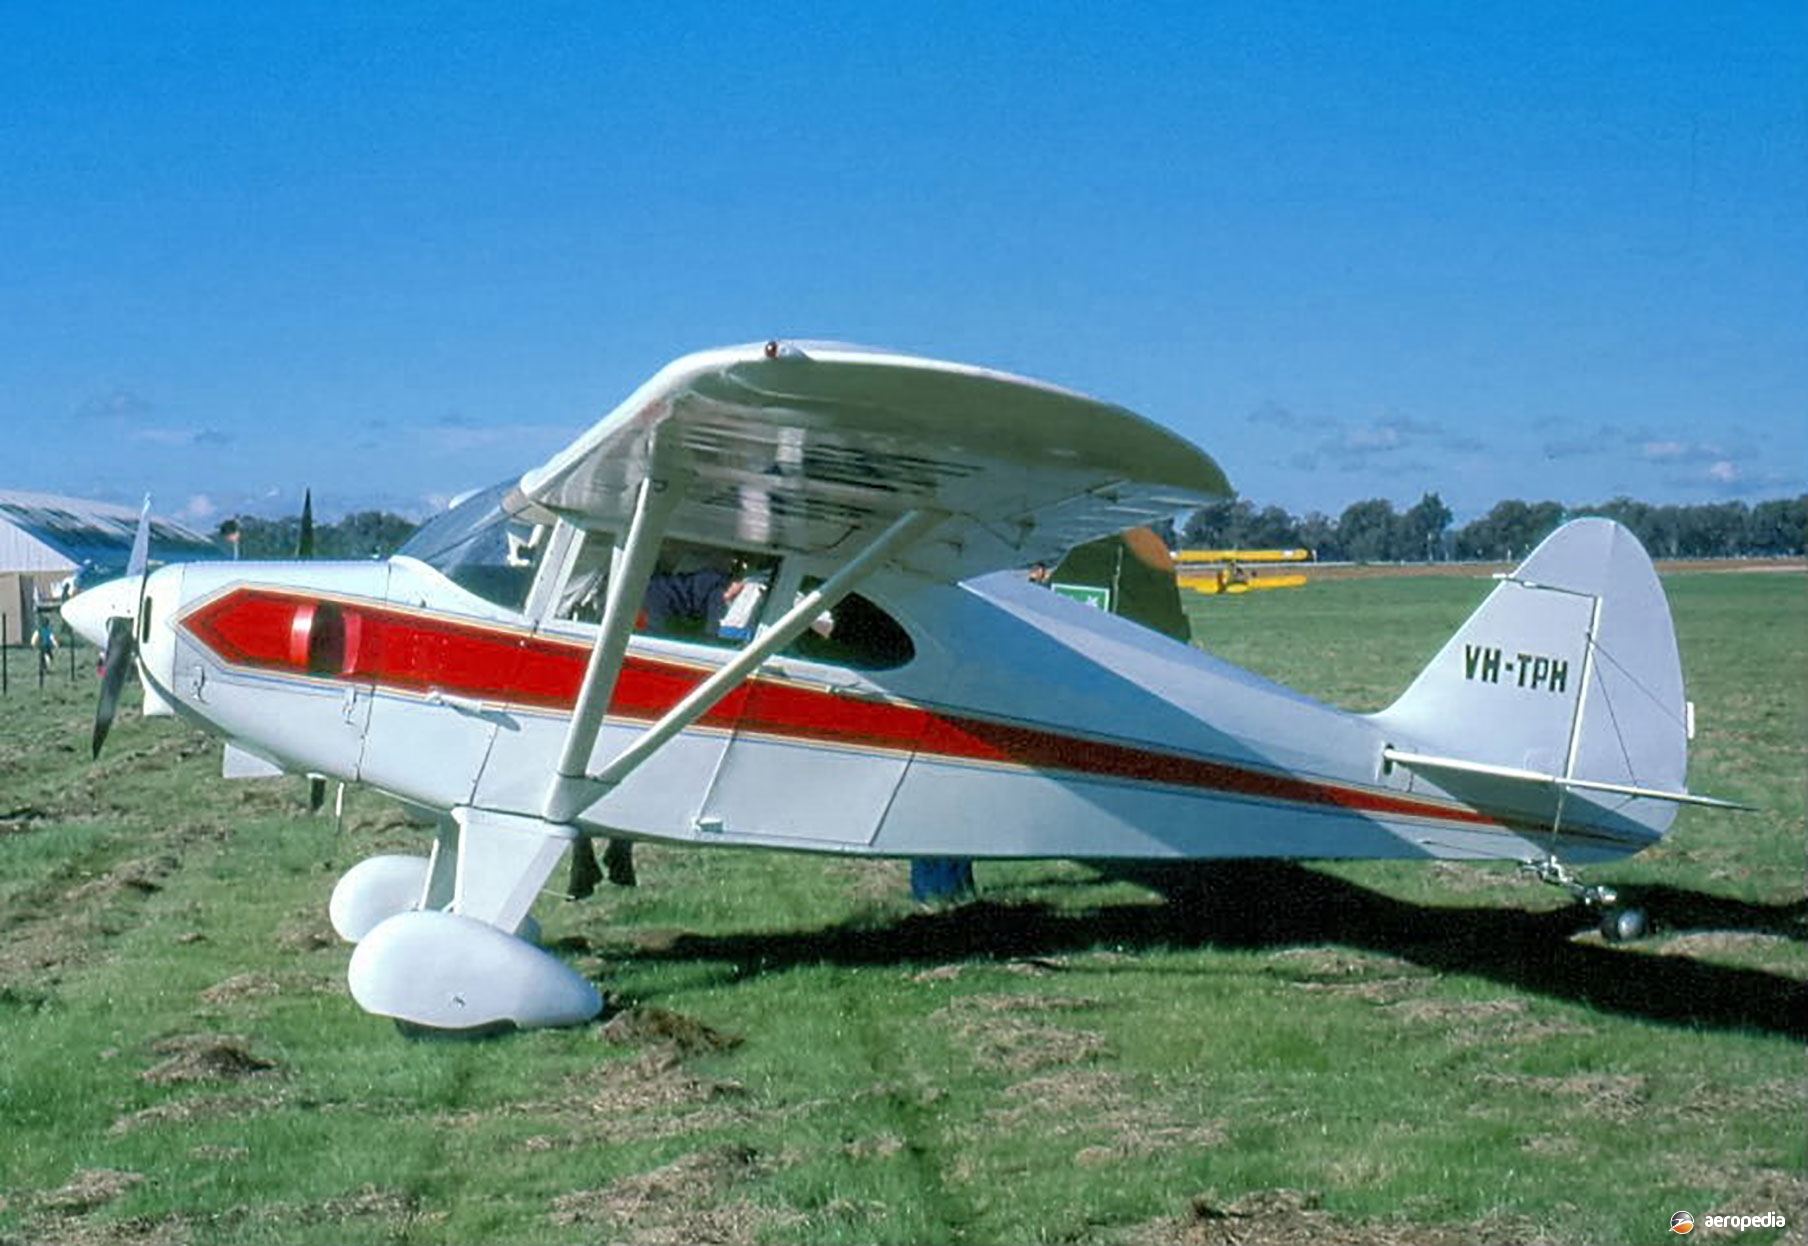 Piper PA-20 Pacer - Wikipedia